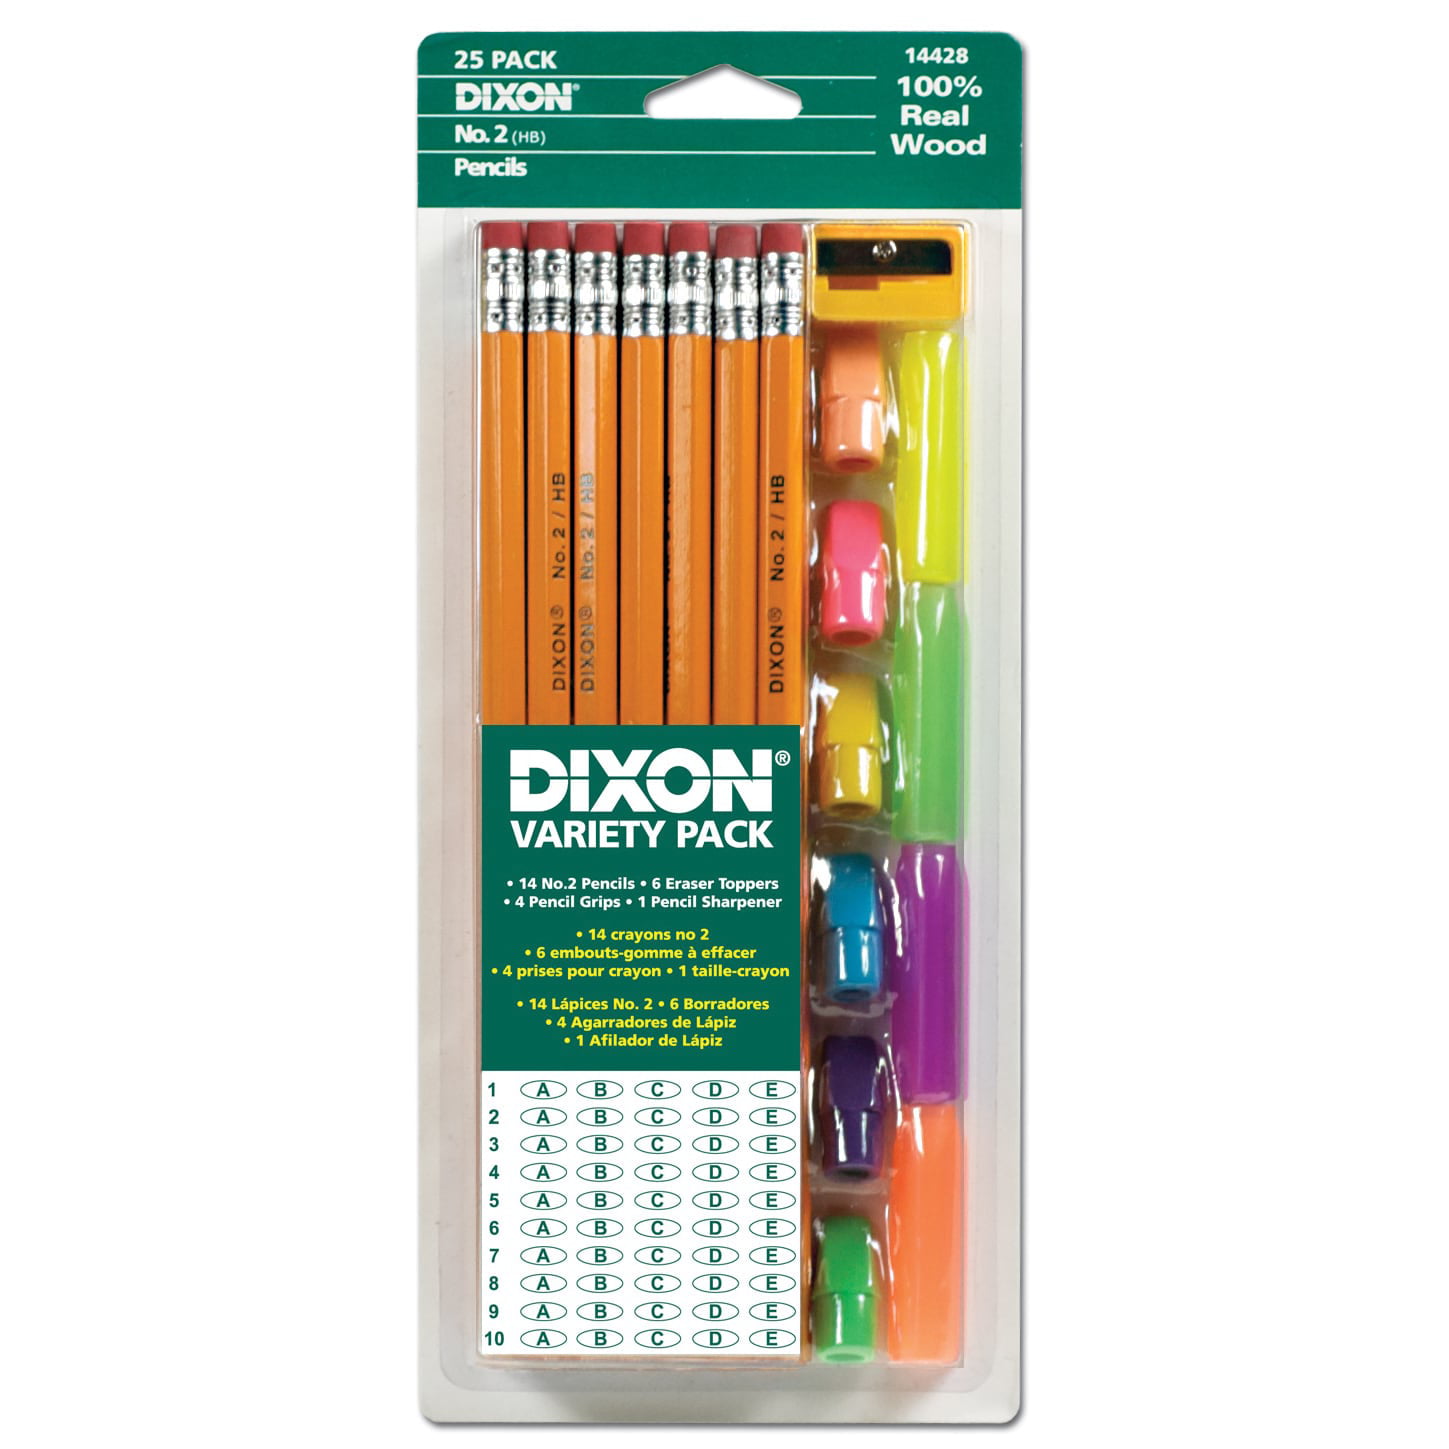 PREMIUM HB PENCILS WITH ERASER A PACK OF 6 